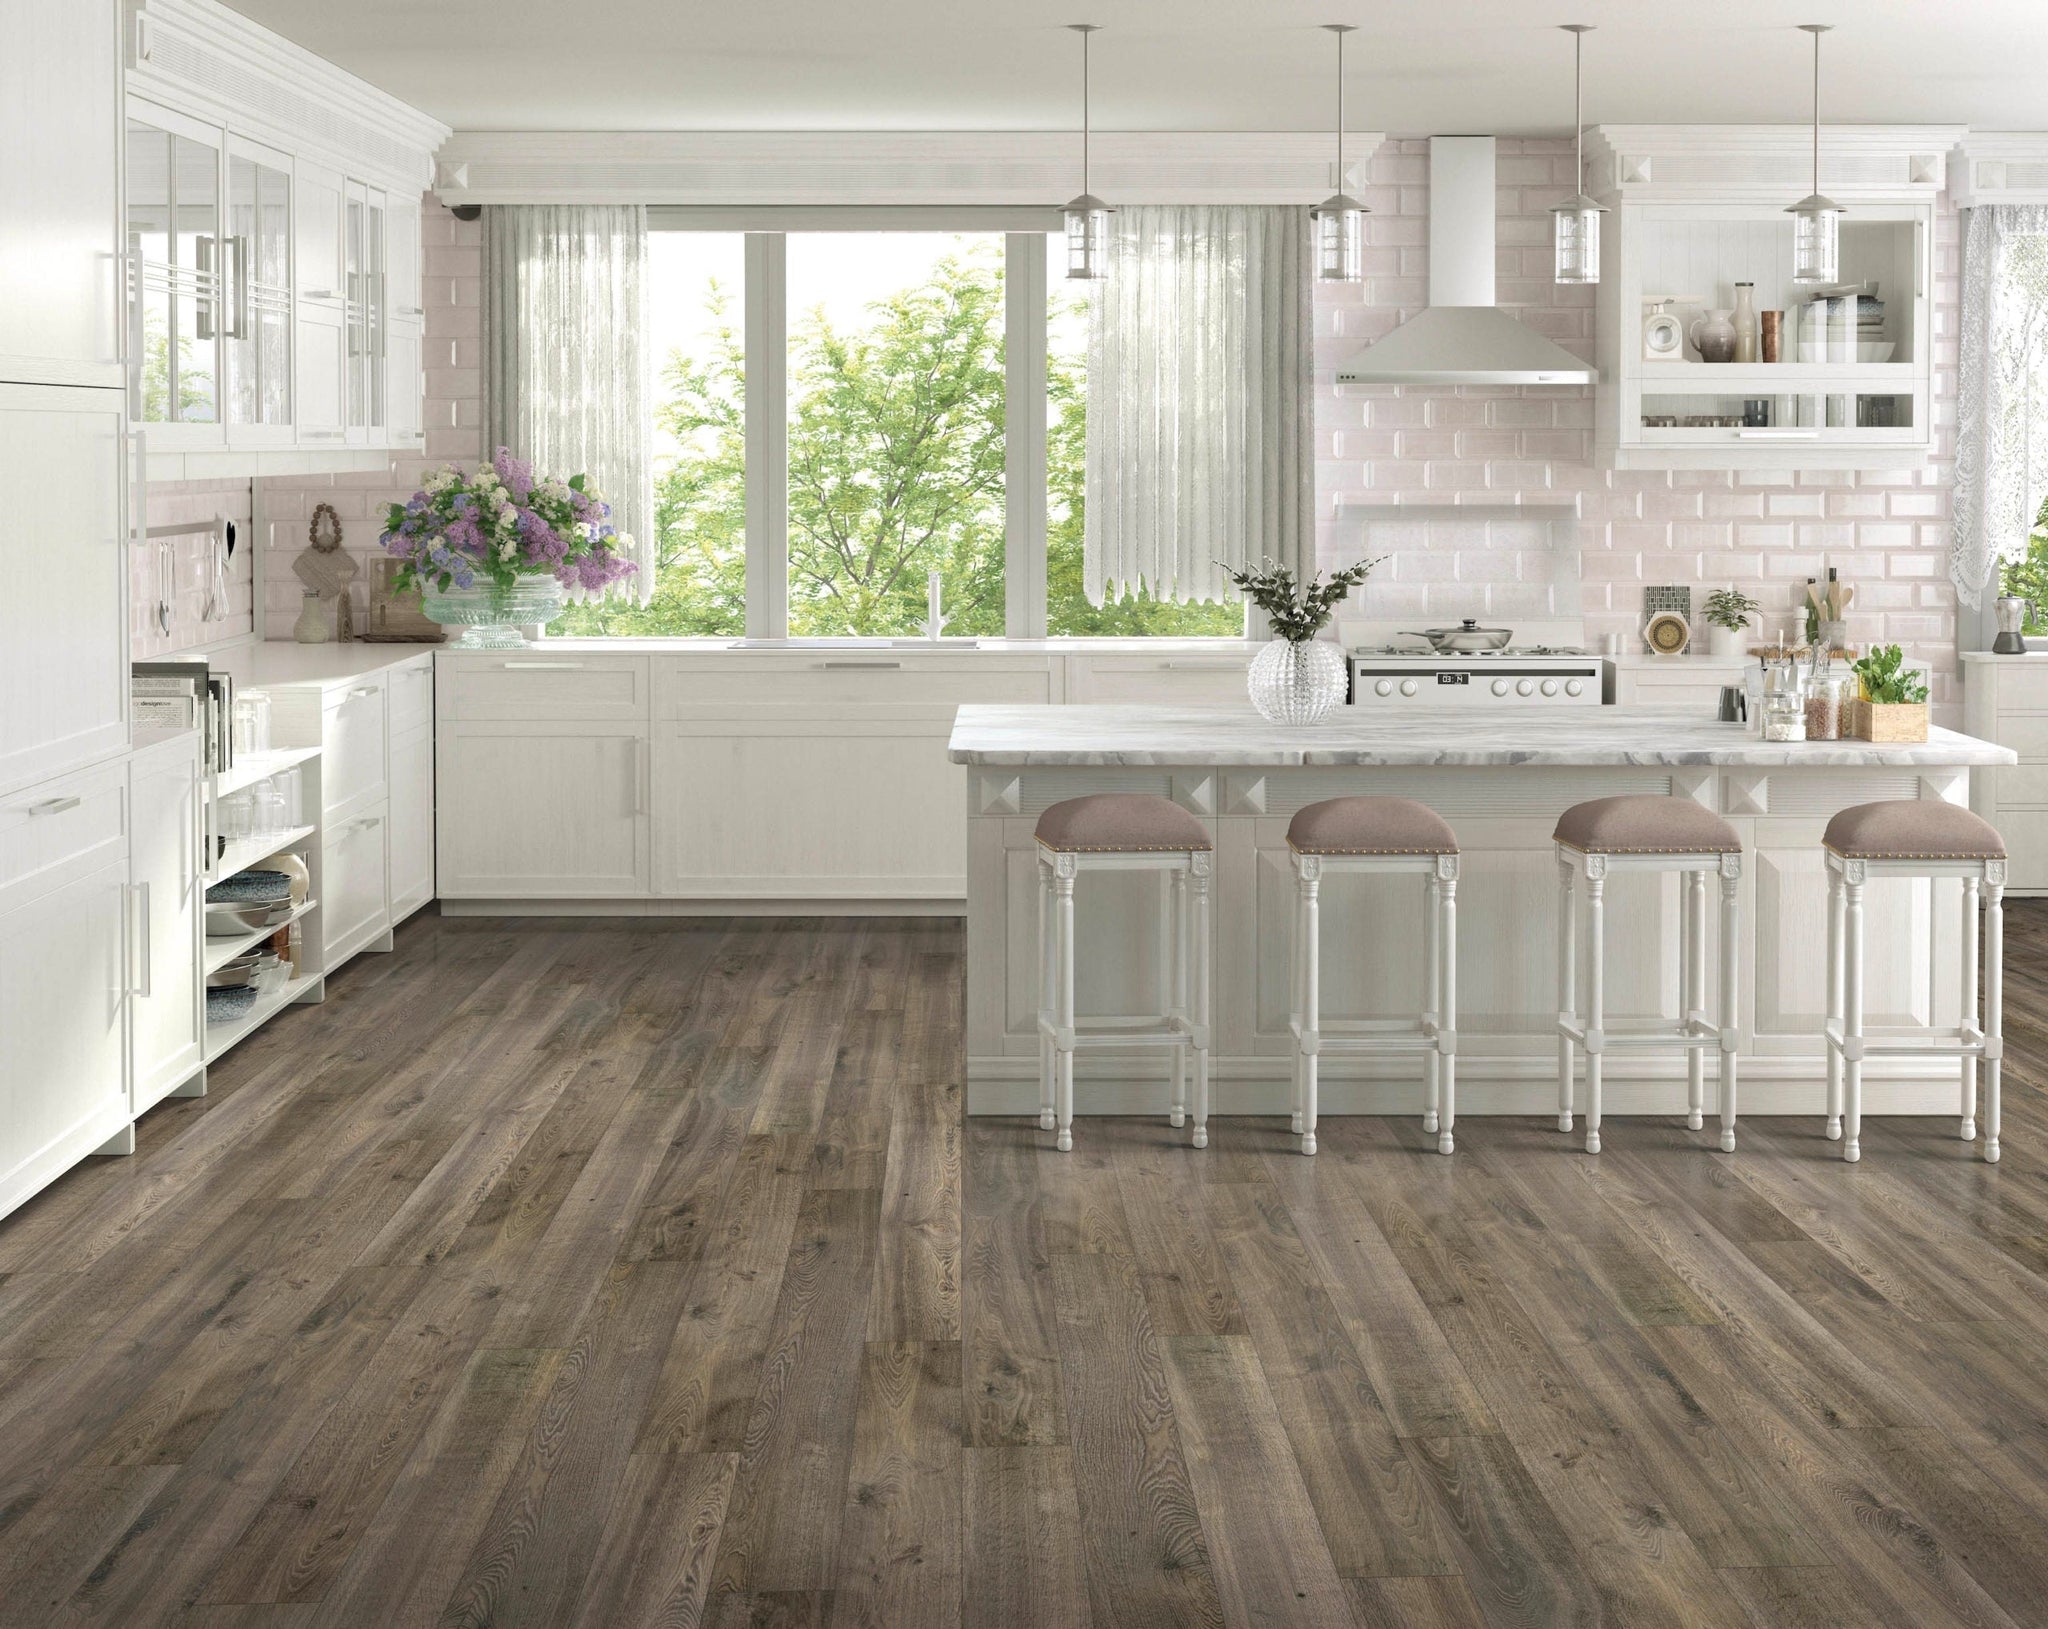 Hot flooring for kitchens is wood — but what about water?